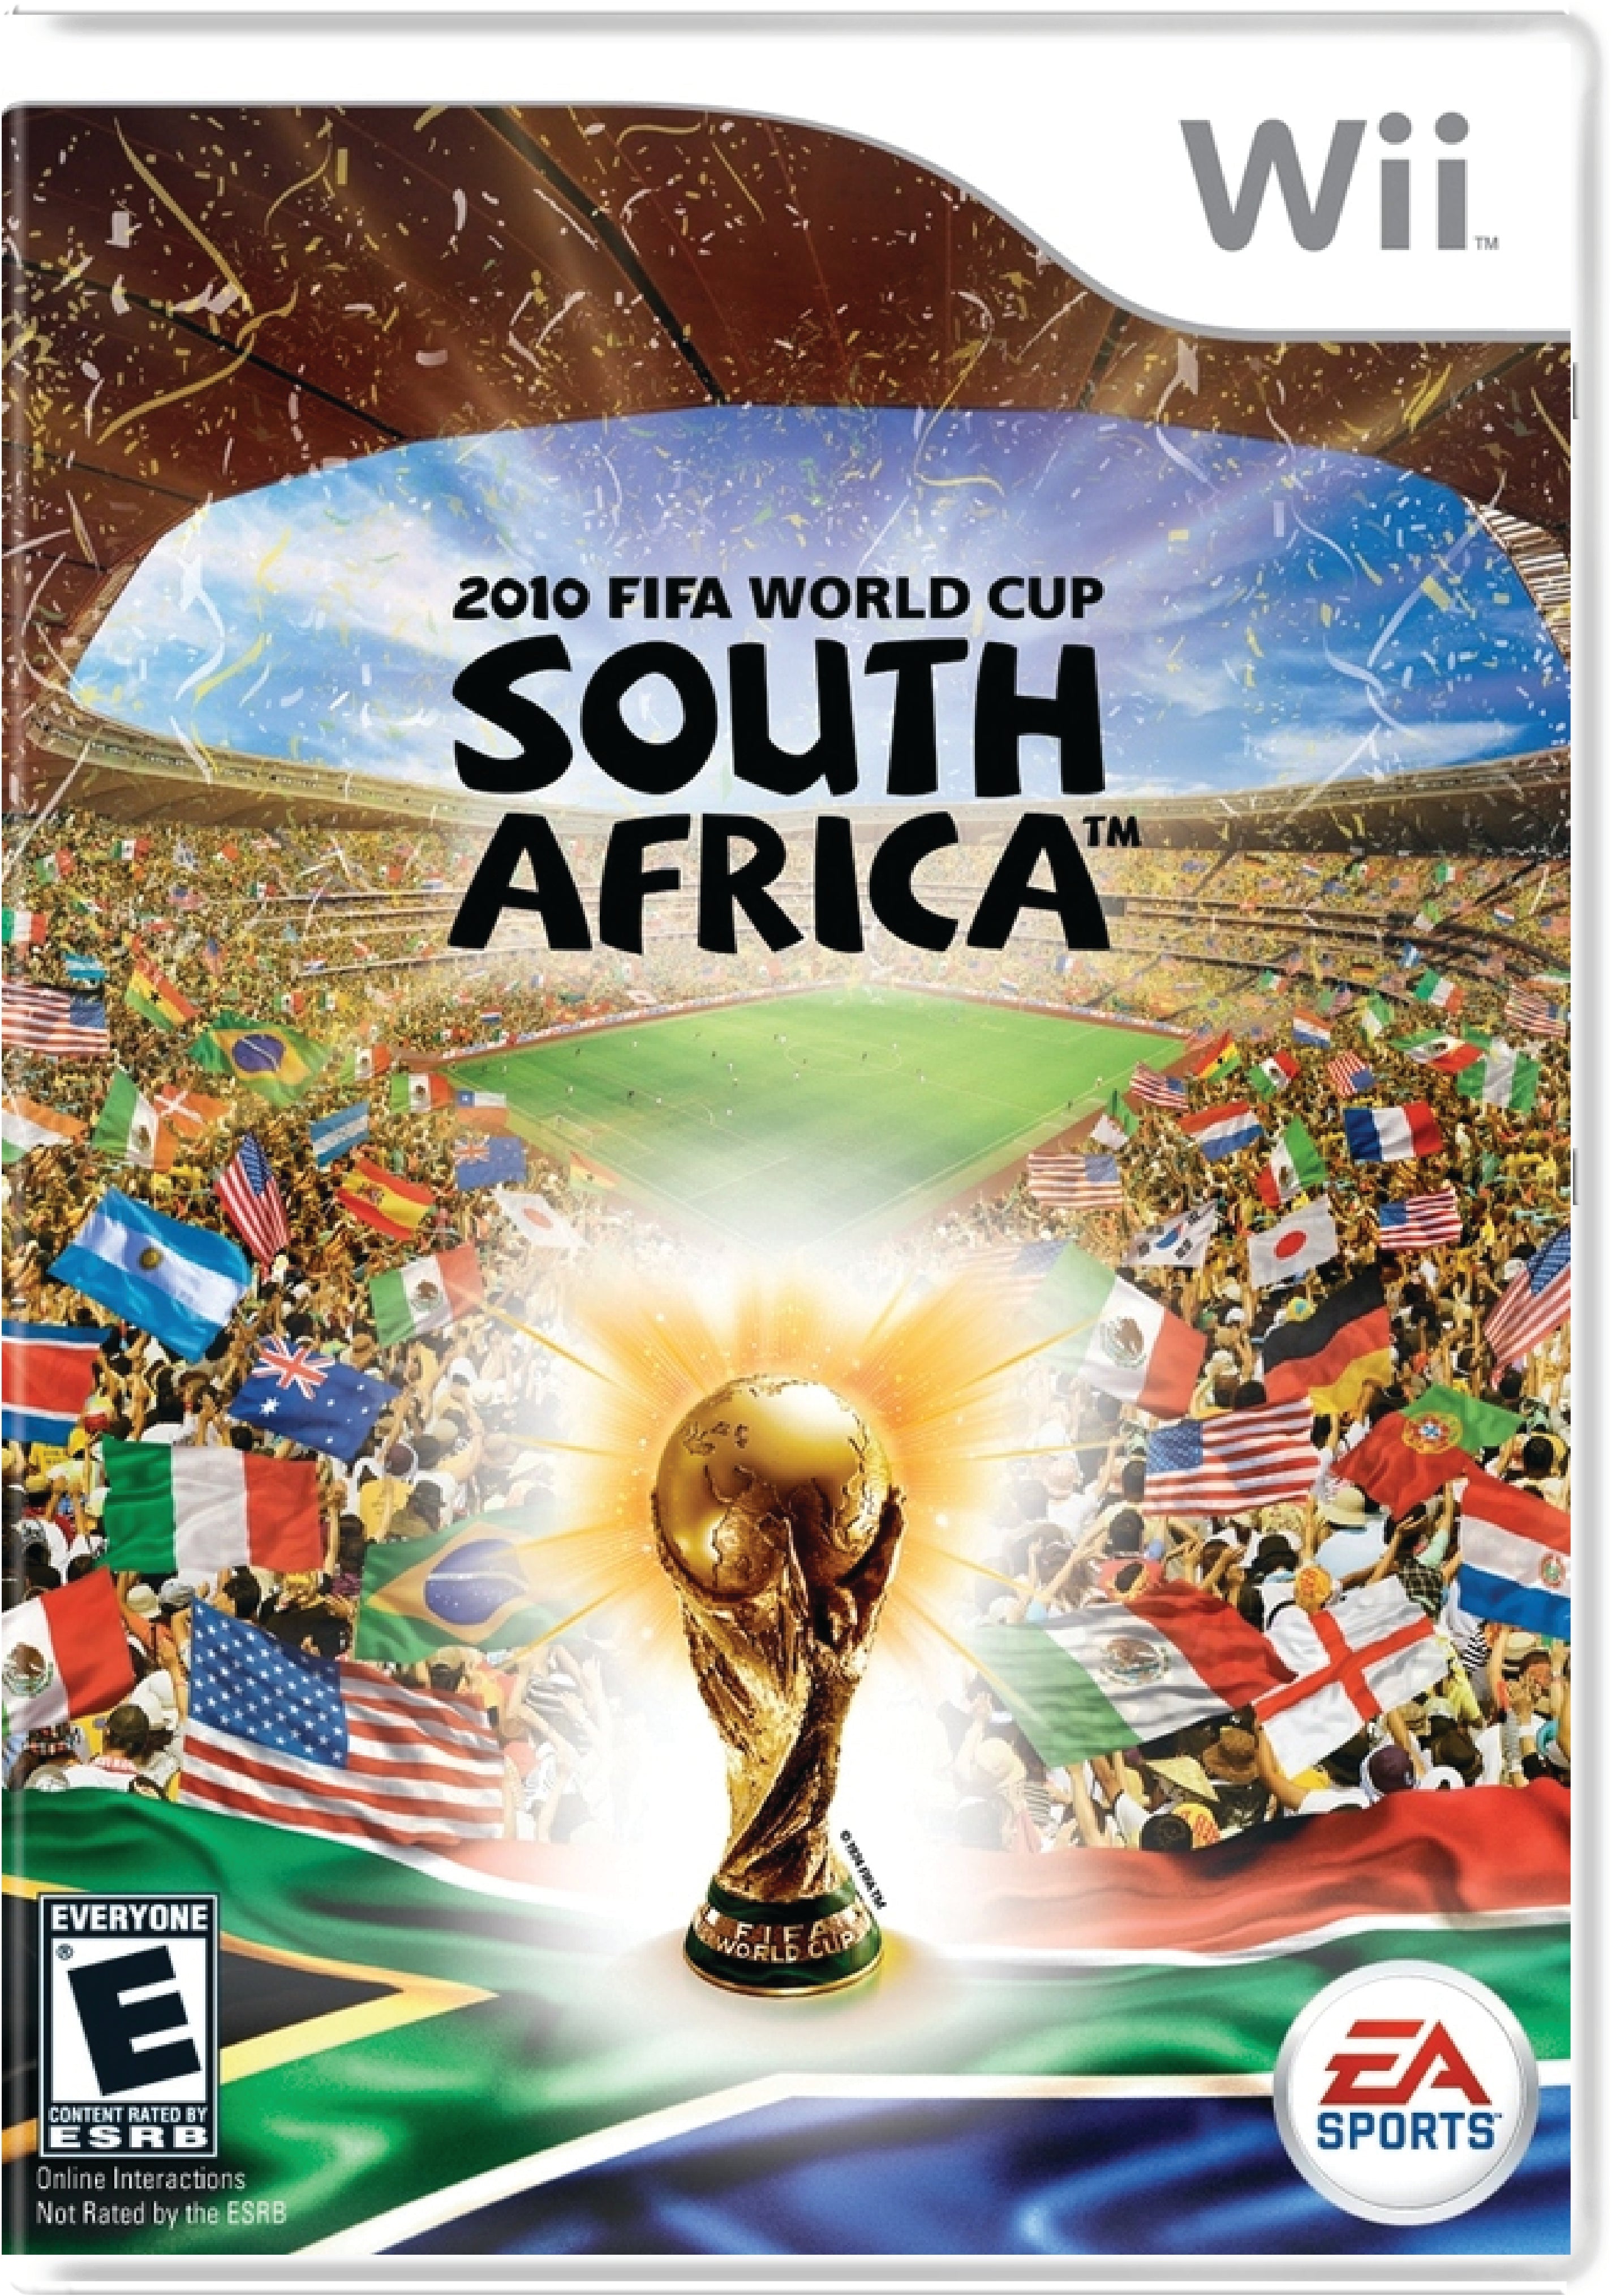 2010 FIFA World Cup South Africa Cover Art